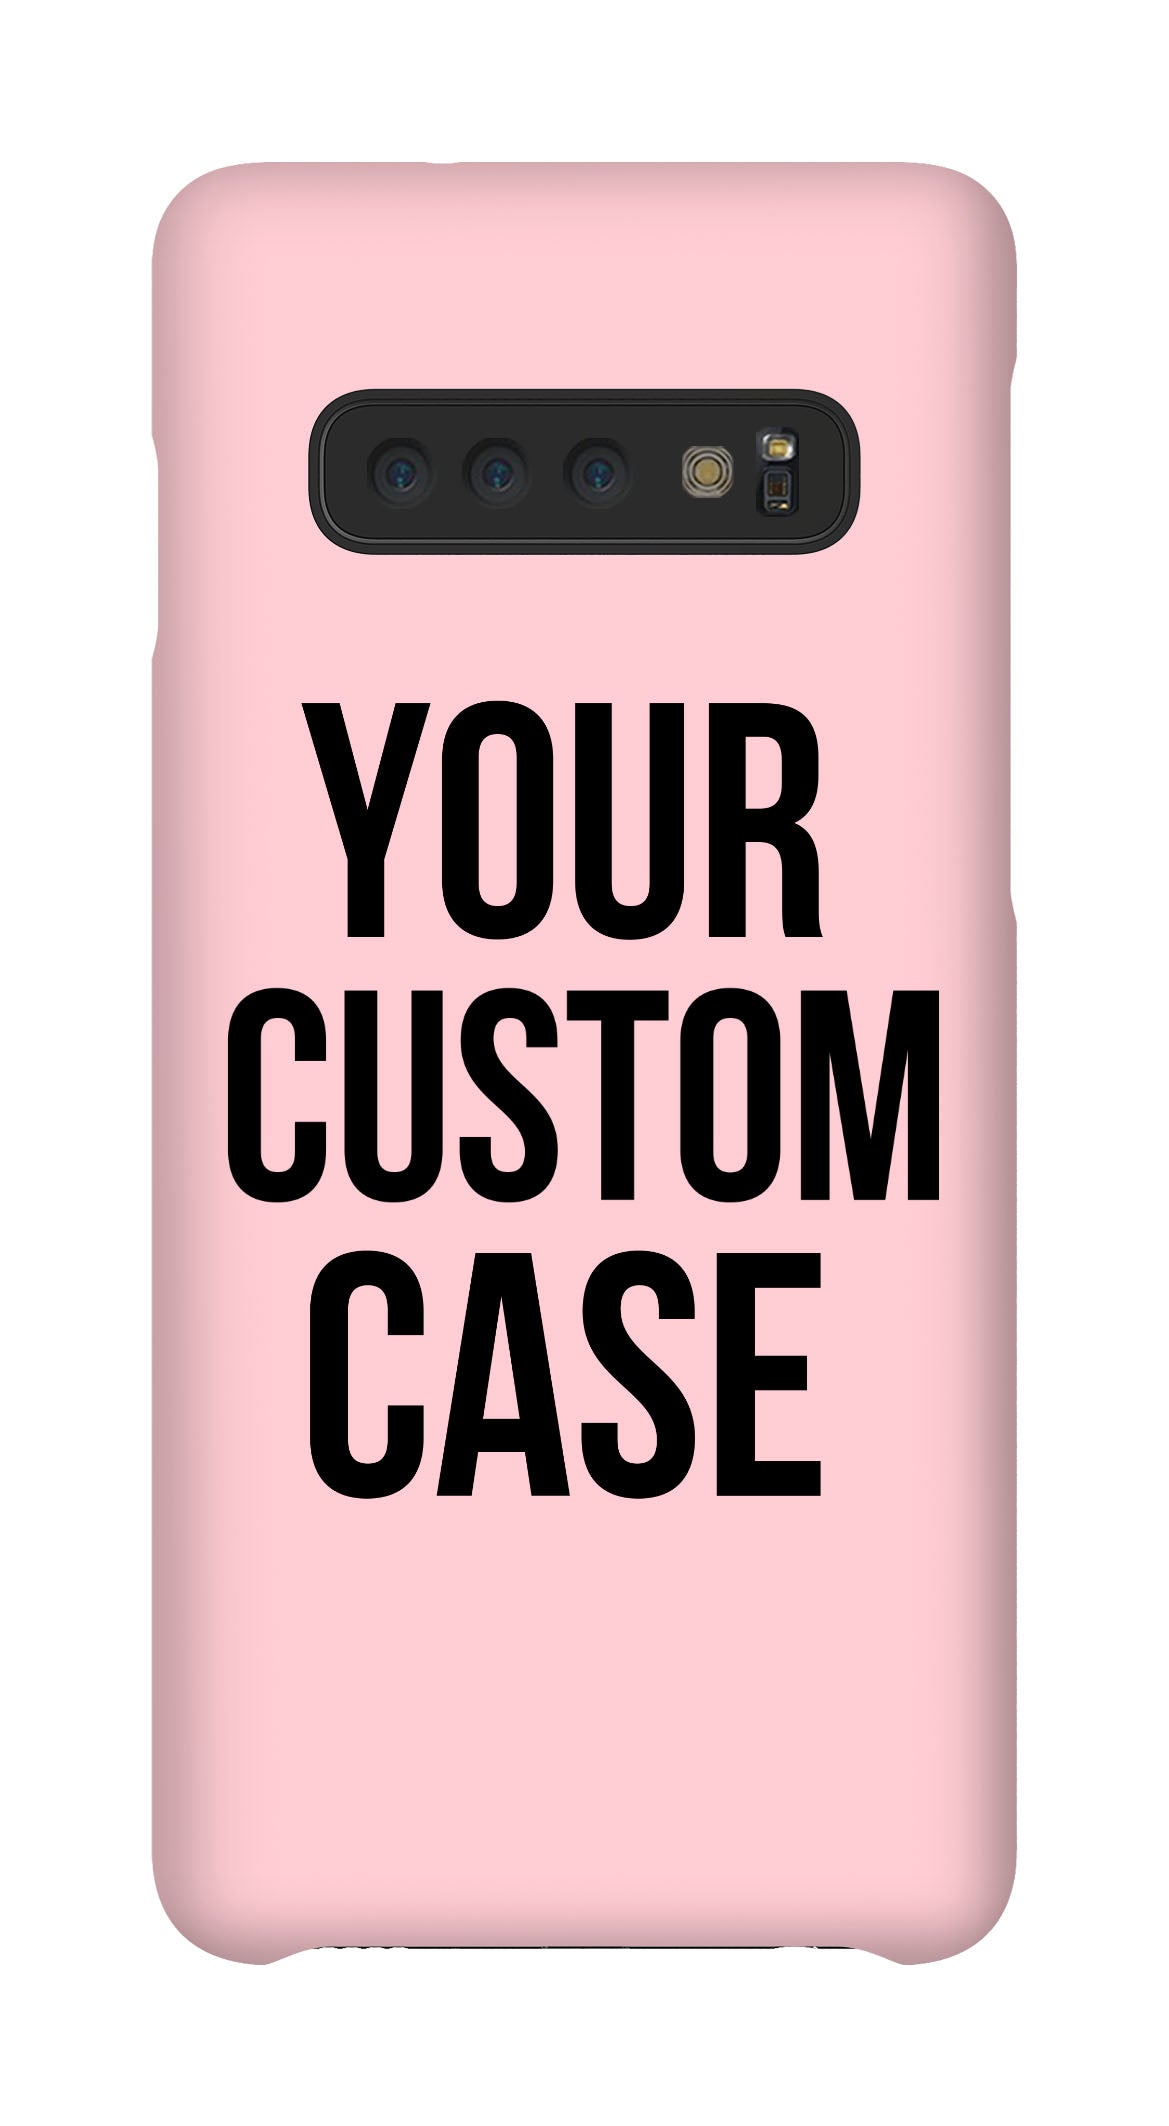 Custom Galaxy S10 Slim Case - Your Custom Design in Cart will be Shipped - Pixly Case